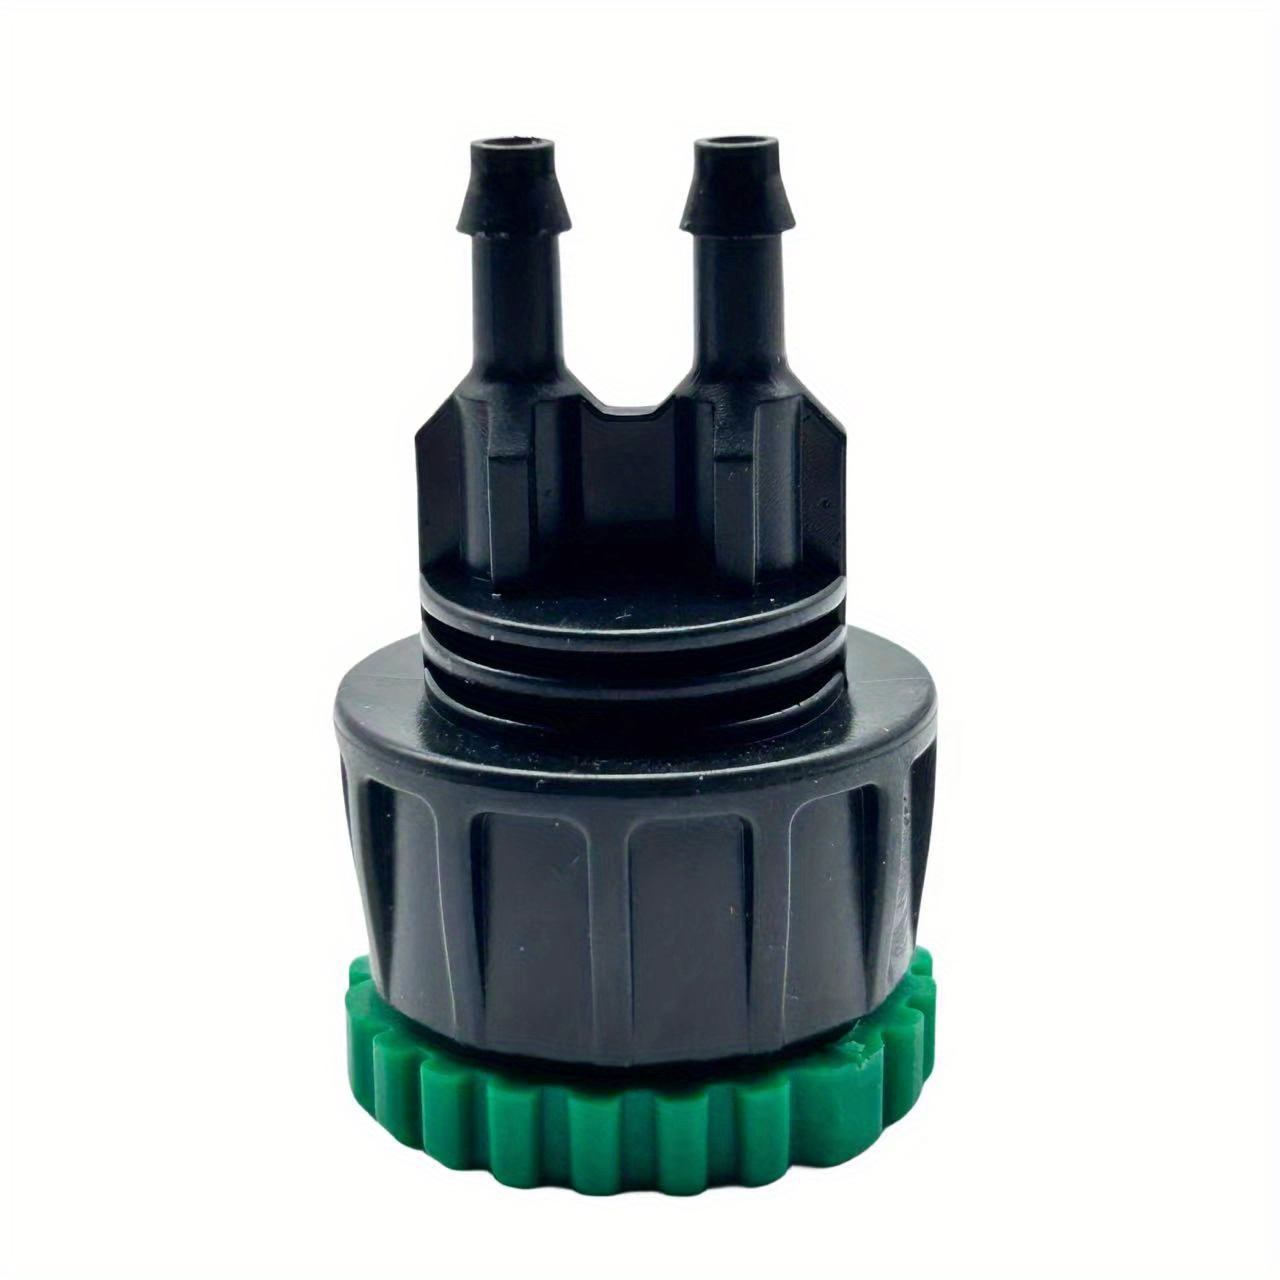 

2pcs, Garden Hose Adapters, 3/4'' Faucet Convert To 1/4'' Drip Irrigation Tubing, Drip Irrigation Hose Connectors For Outdoor Watering, Fittings